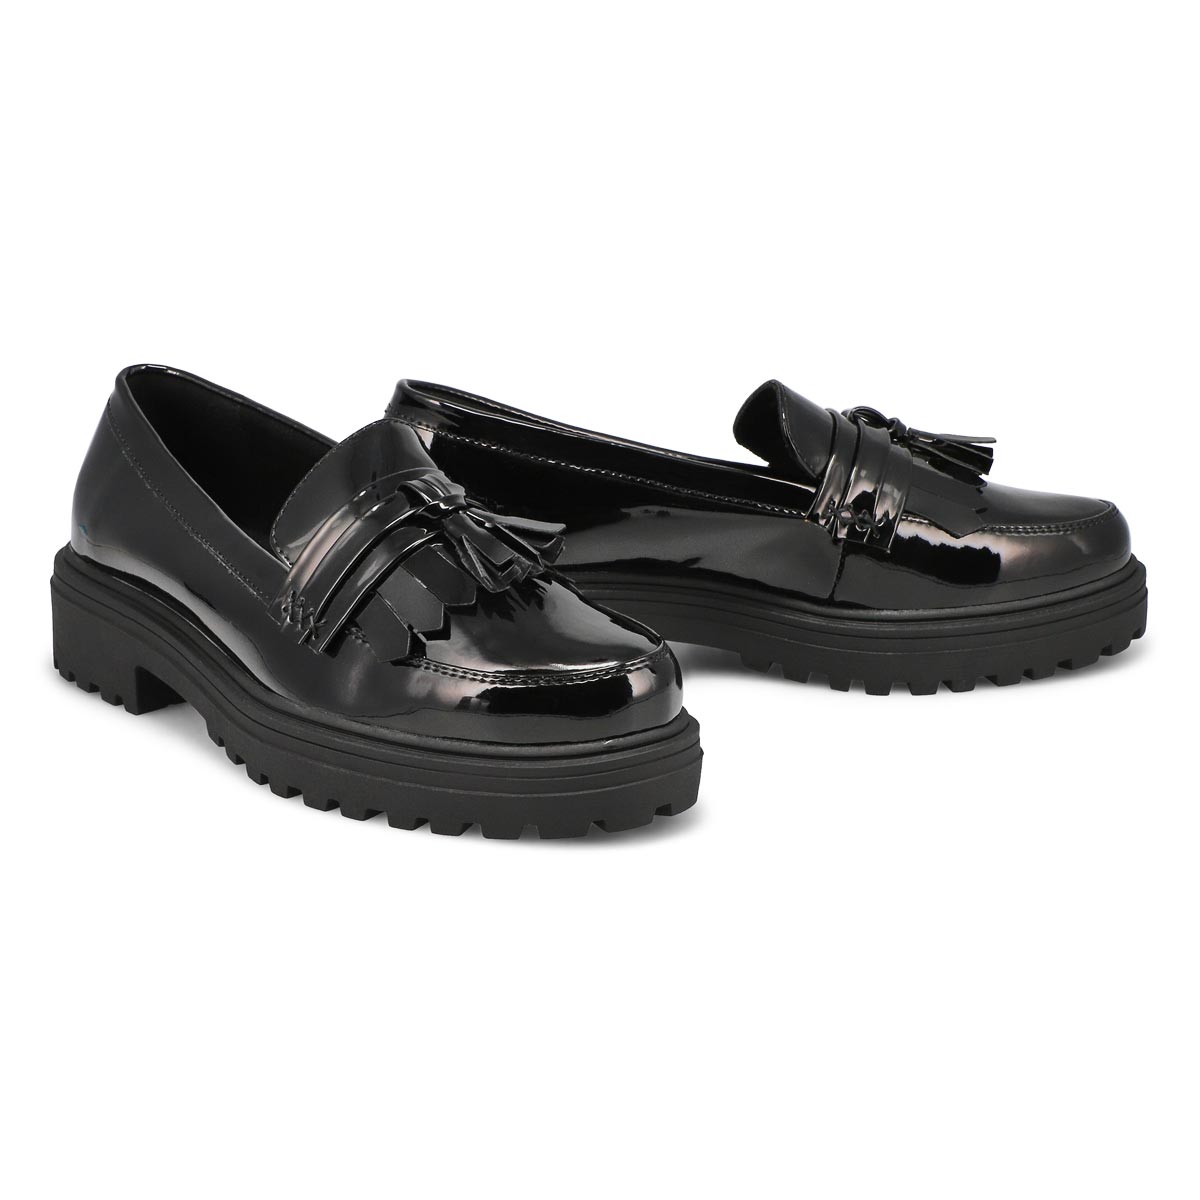 SoftMoc Women's Dory Casual Loafer - Black